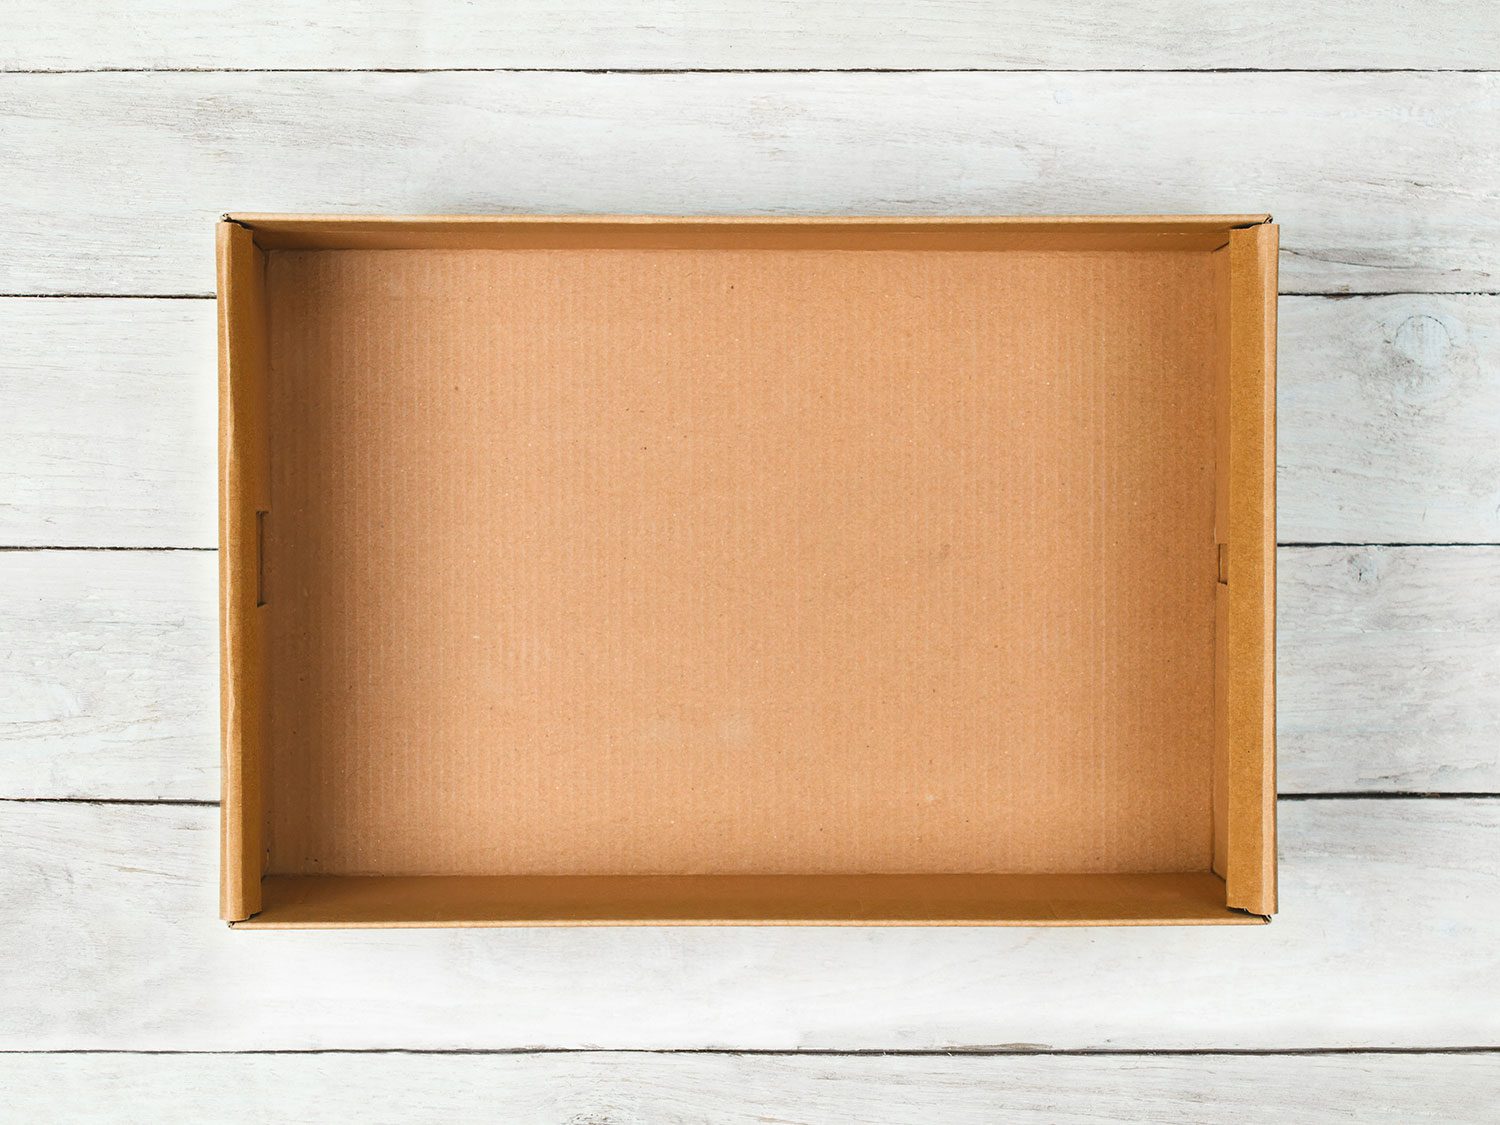 5 New Uses for Cardboard Boxes